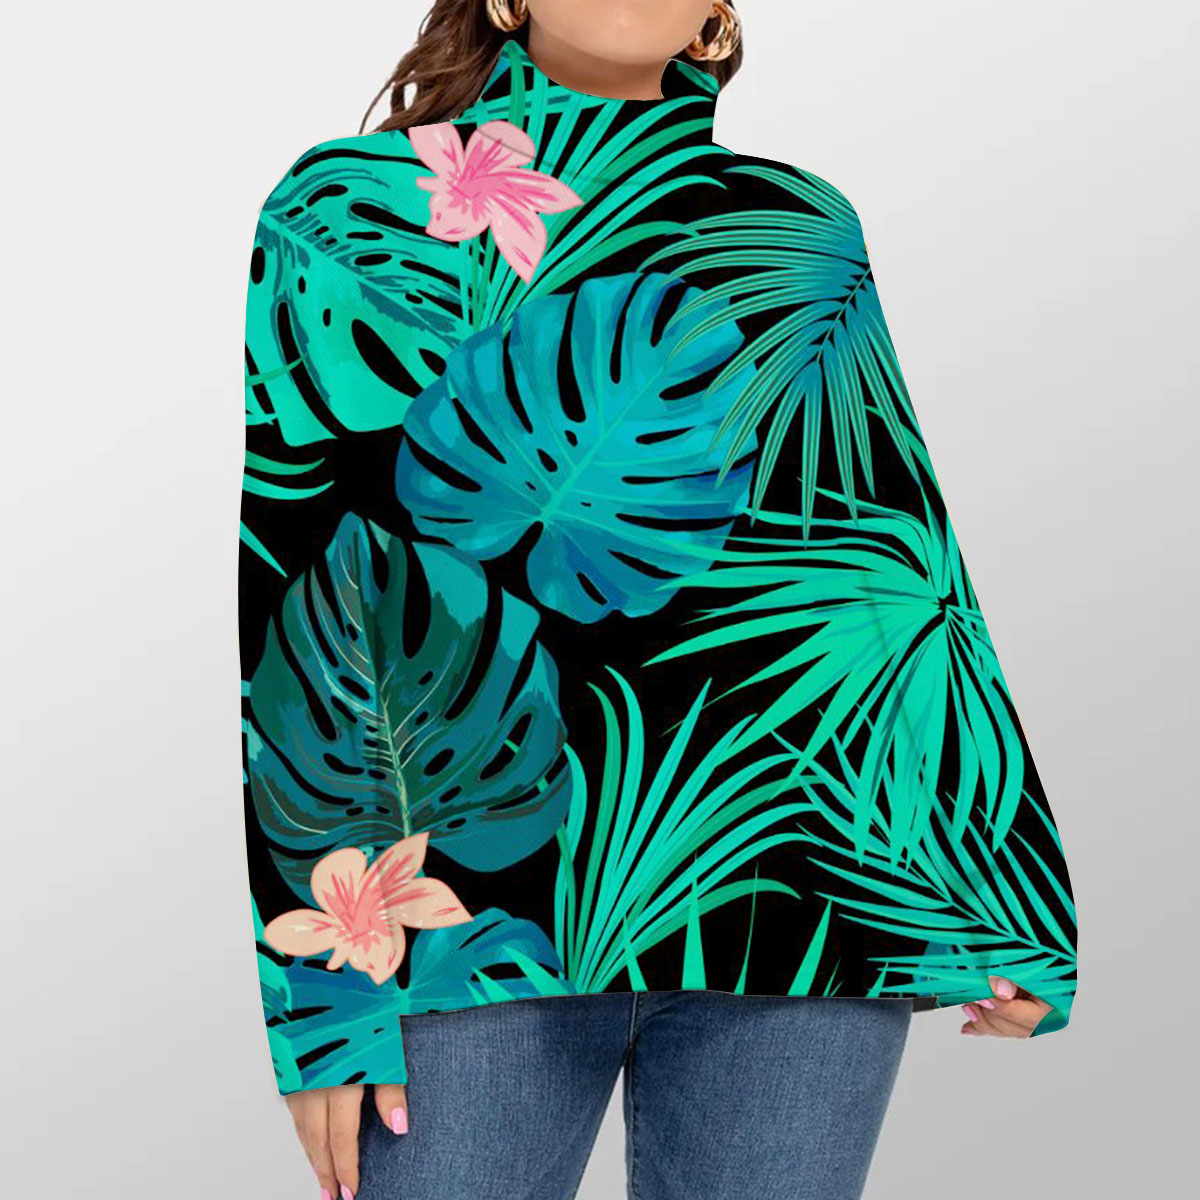 Tropical Jungle Palm Leaves Flowers Turtleneck Sweater